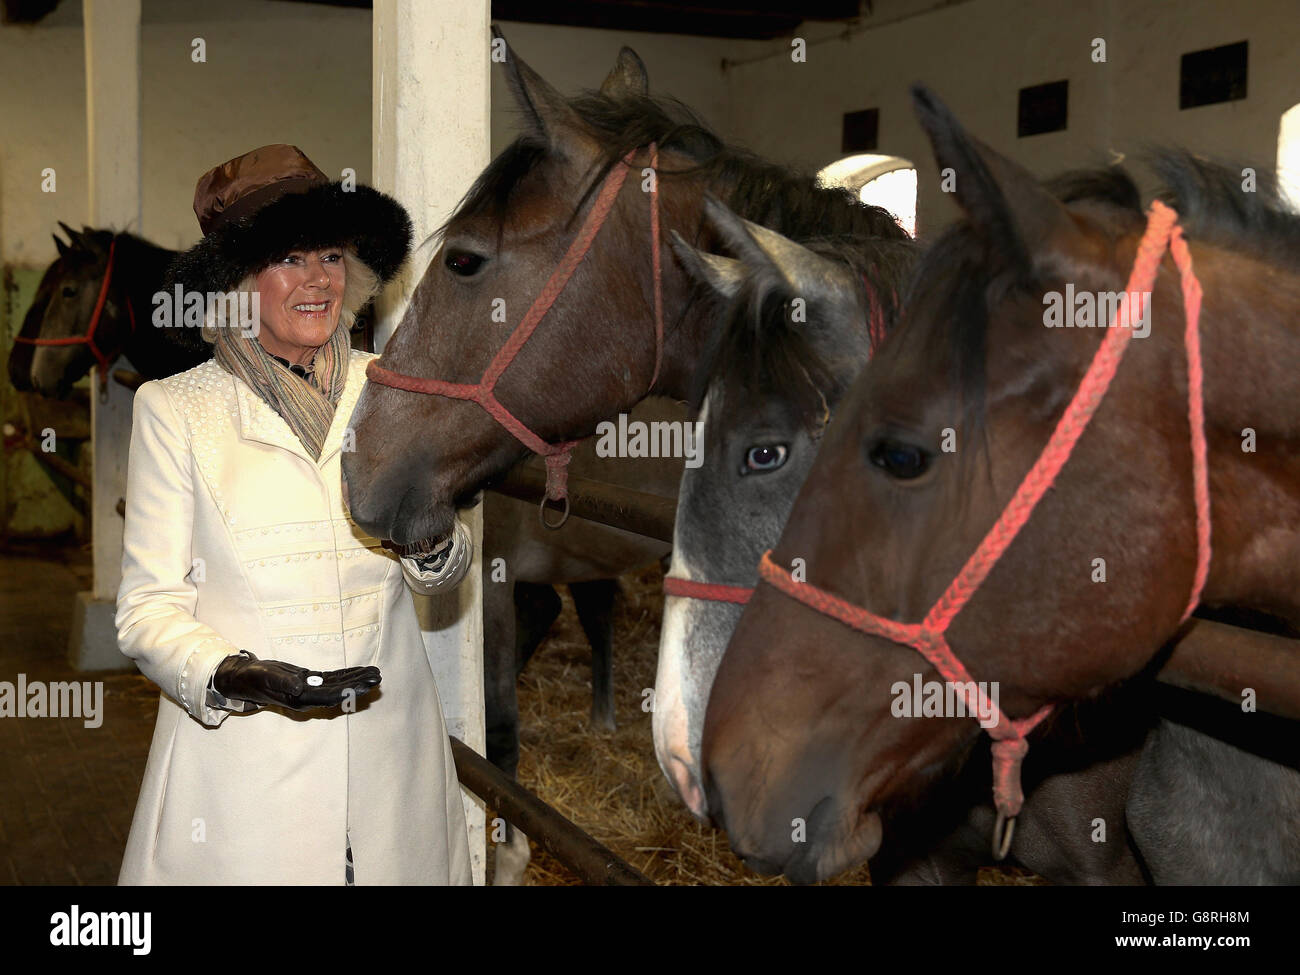 The Duchess of Cornwall offers a horse a mint as she visits Dakovo State Stud Farm in Osijek, Croatia, on the second day of her tour of the Balkans with the Prince of Wales. Stock Photo